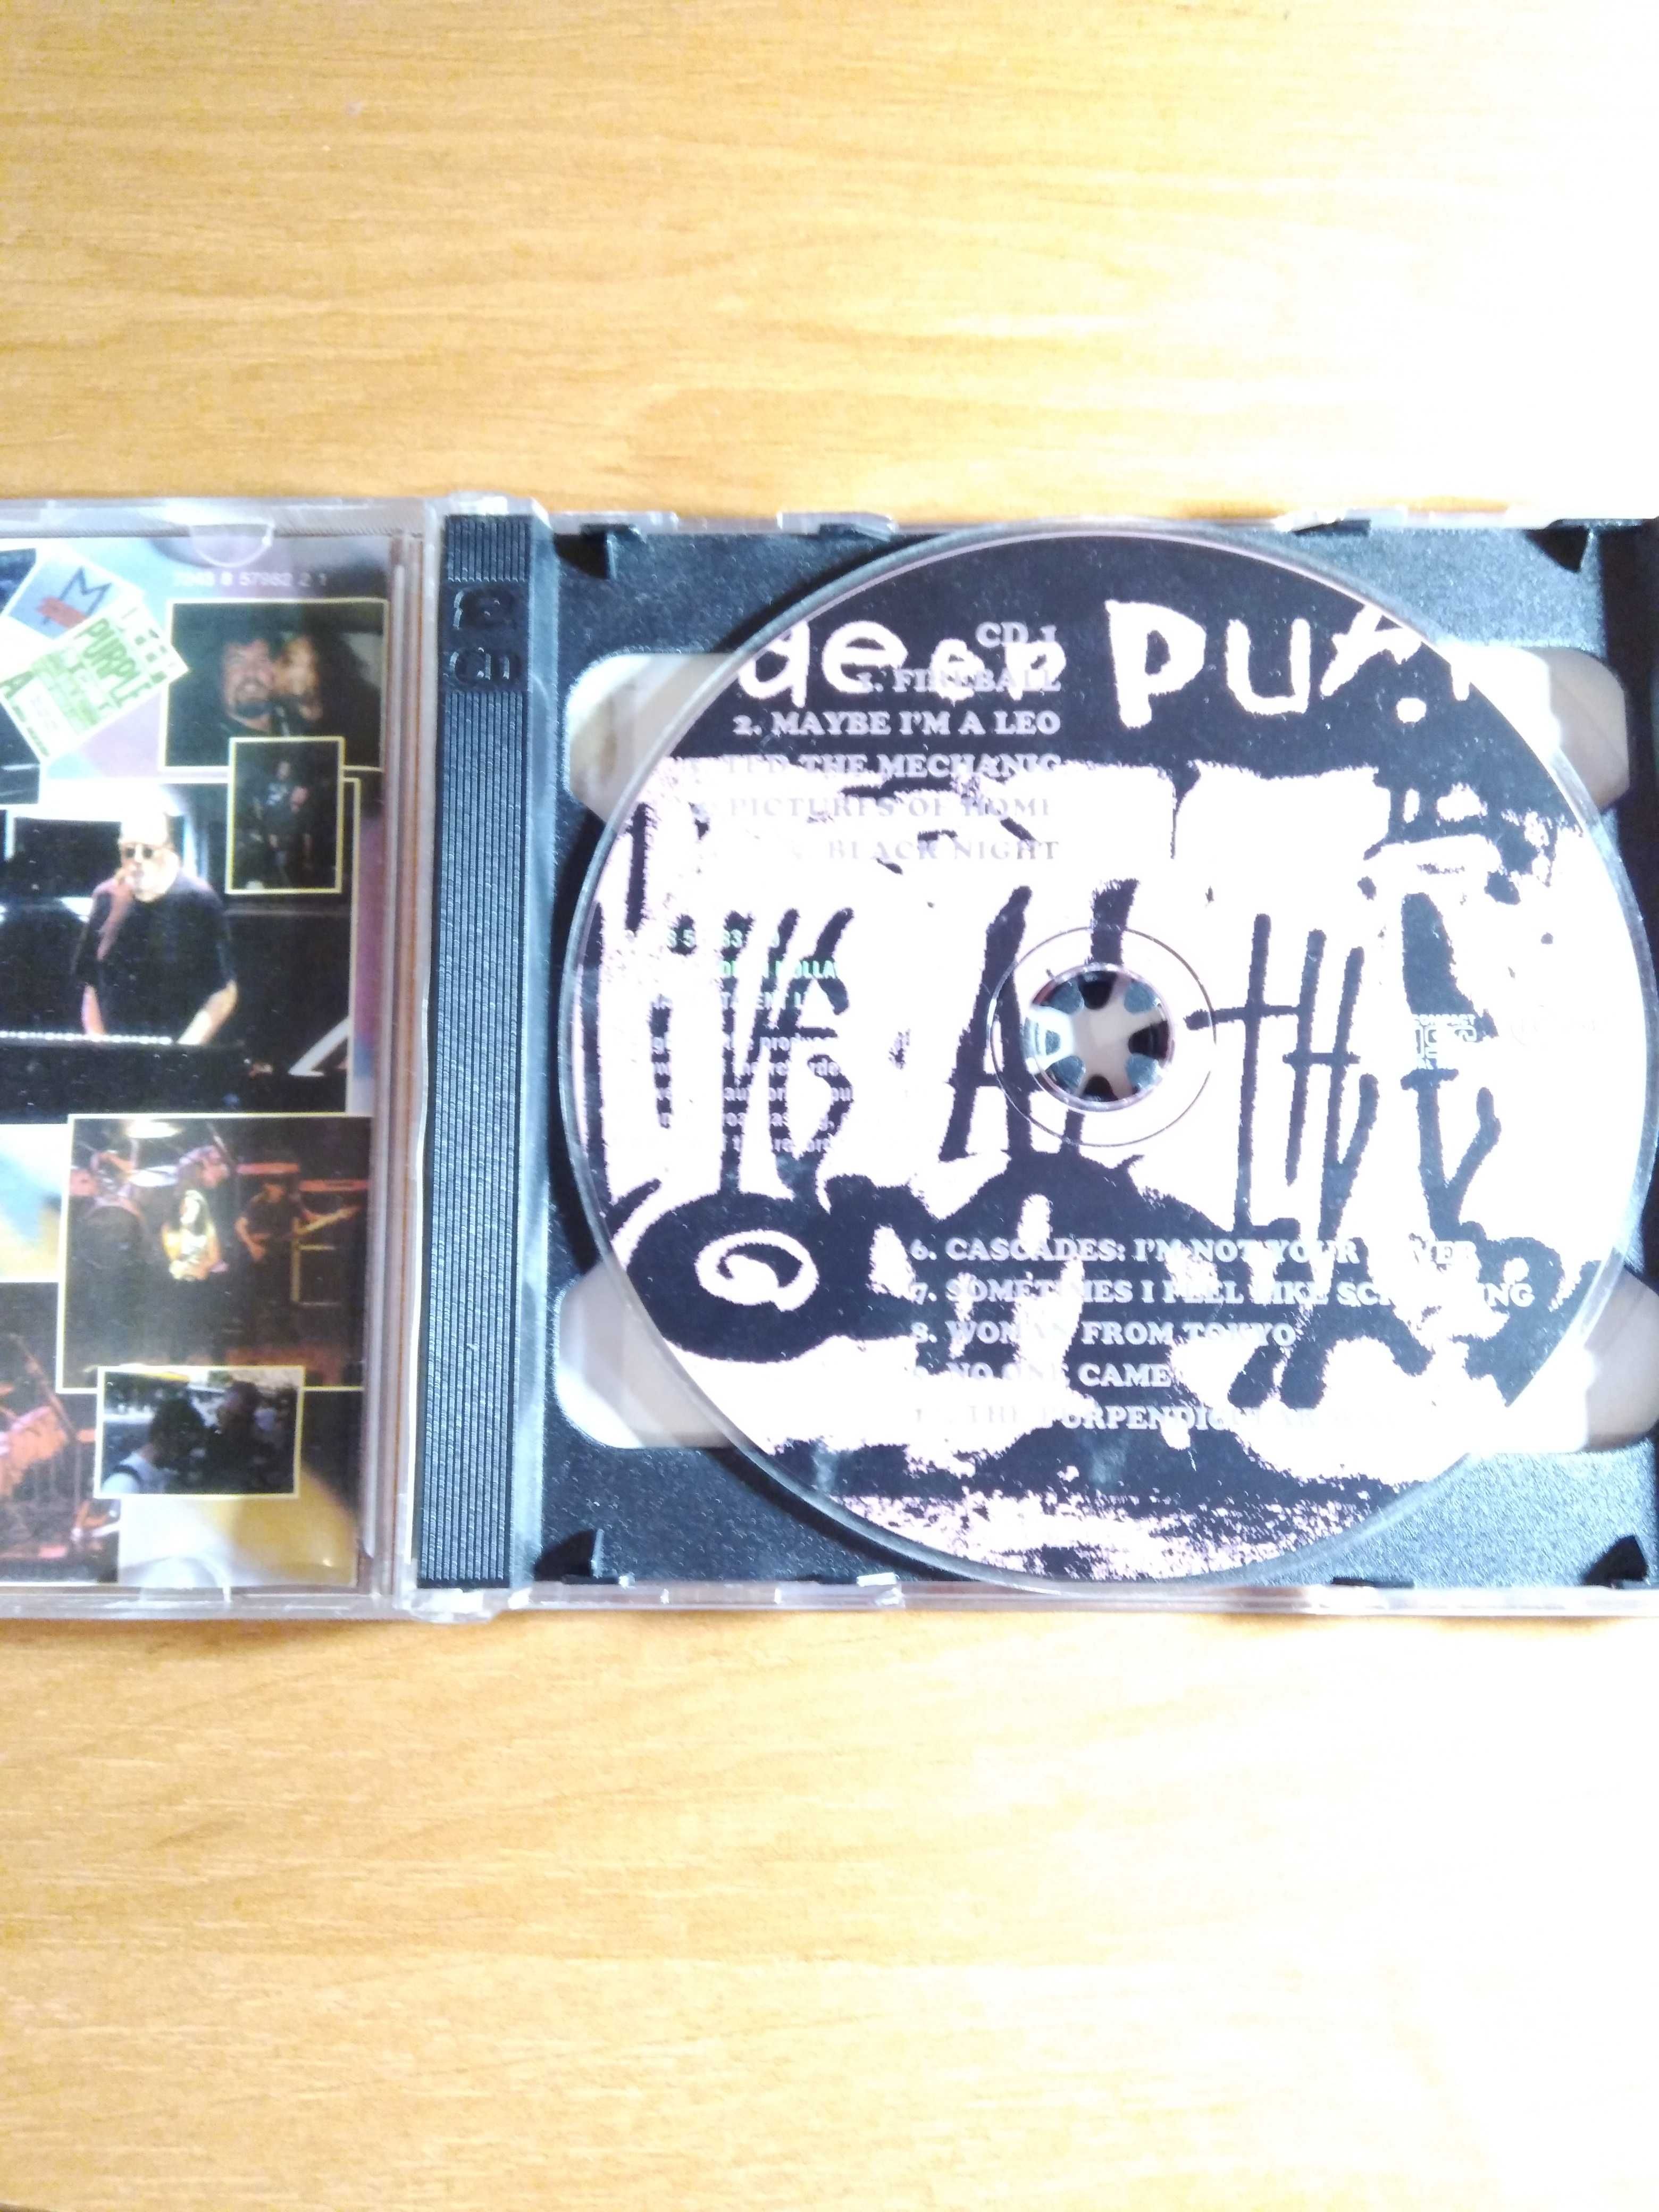 Deep Purple, Live at the Olimpia'96, 2 CD, Printed in Holland.